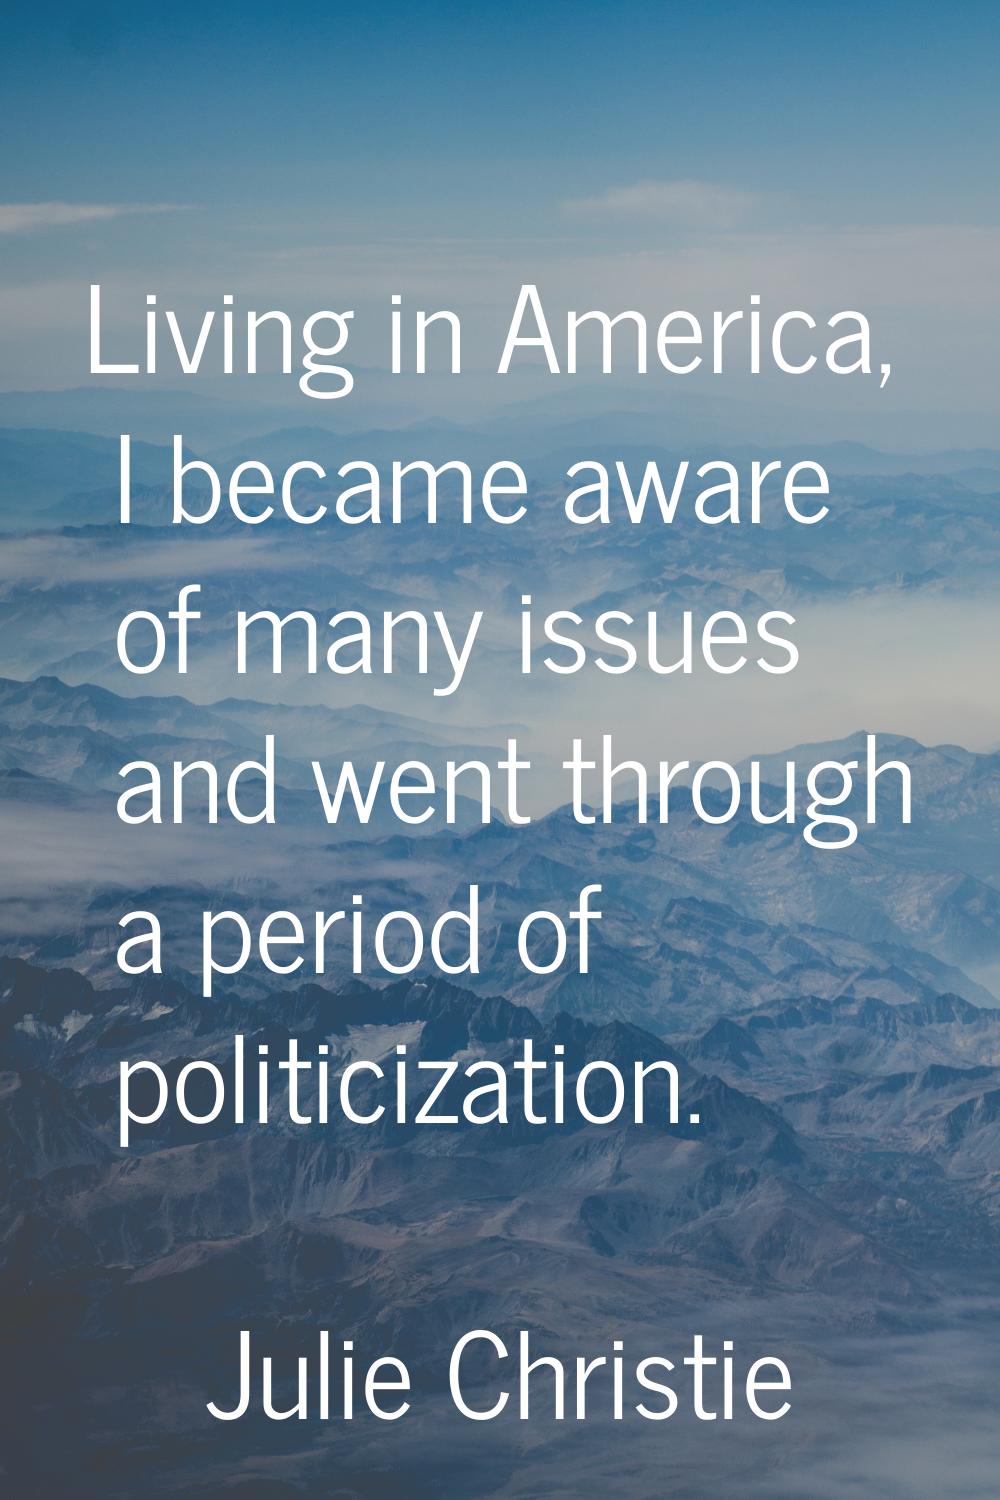 Living in America, I became aware of many issues and went through a period of politicization.